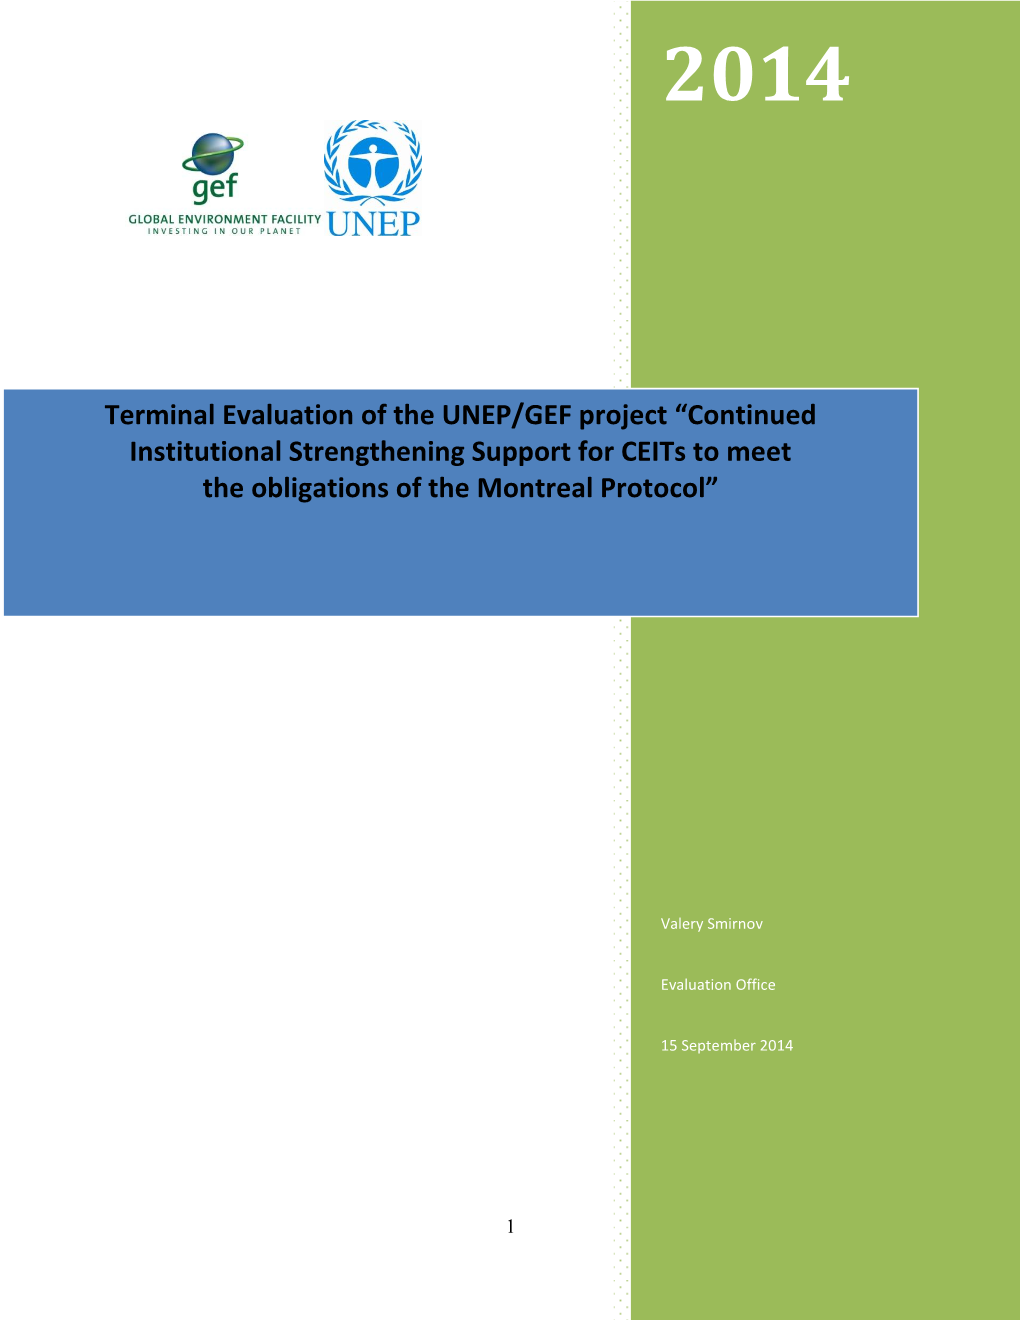 Terminal Evaluation of the UNEP/GEF Project “Continued Institutional Strengthening Support for Ceits to Meet the Obligations of the Montreal Protocol”